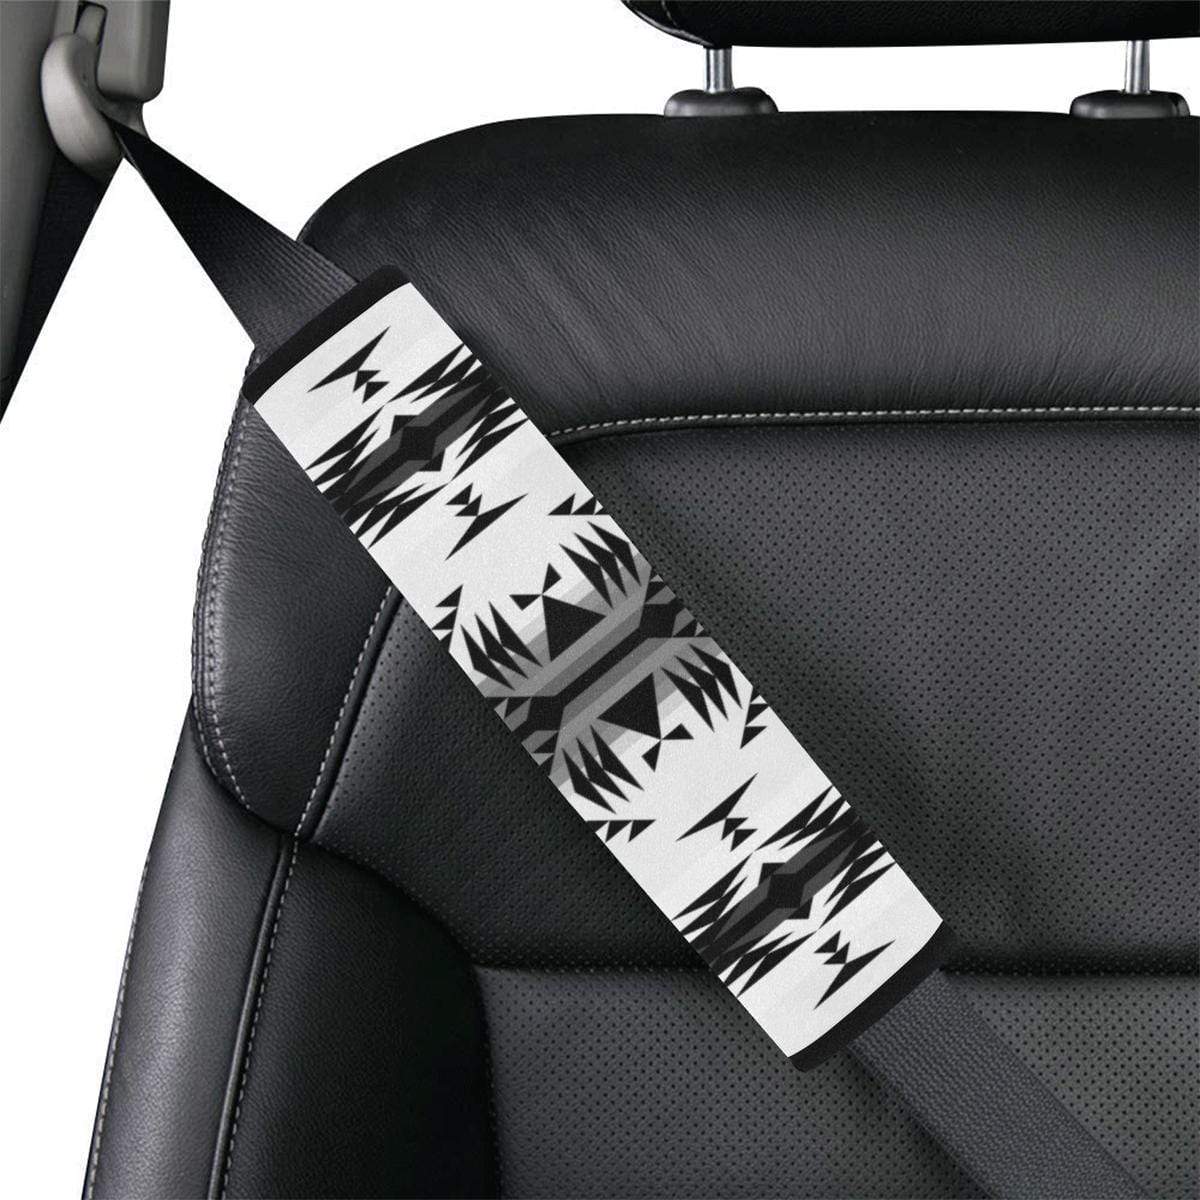 Between the Mountains White and Black Car Seat Belt Cover 7''x12.6'' Car Seat Belt Cover 7''x12.6'' e-joyer 